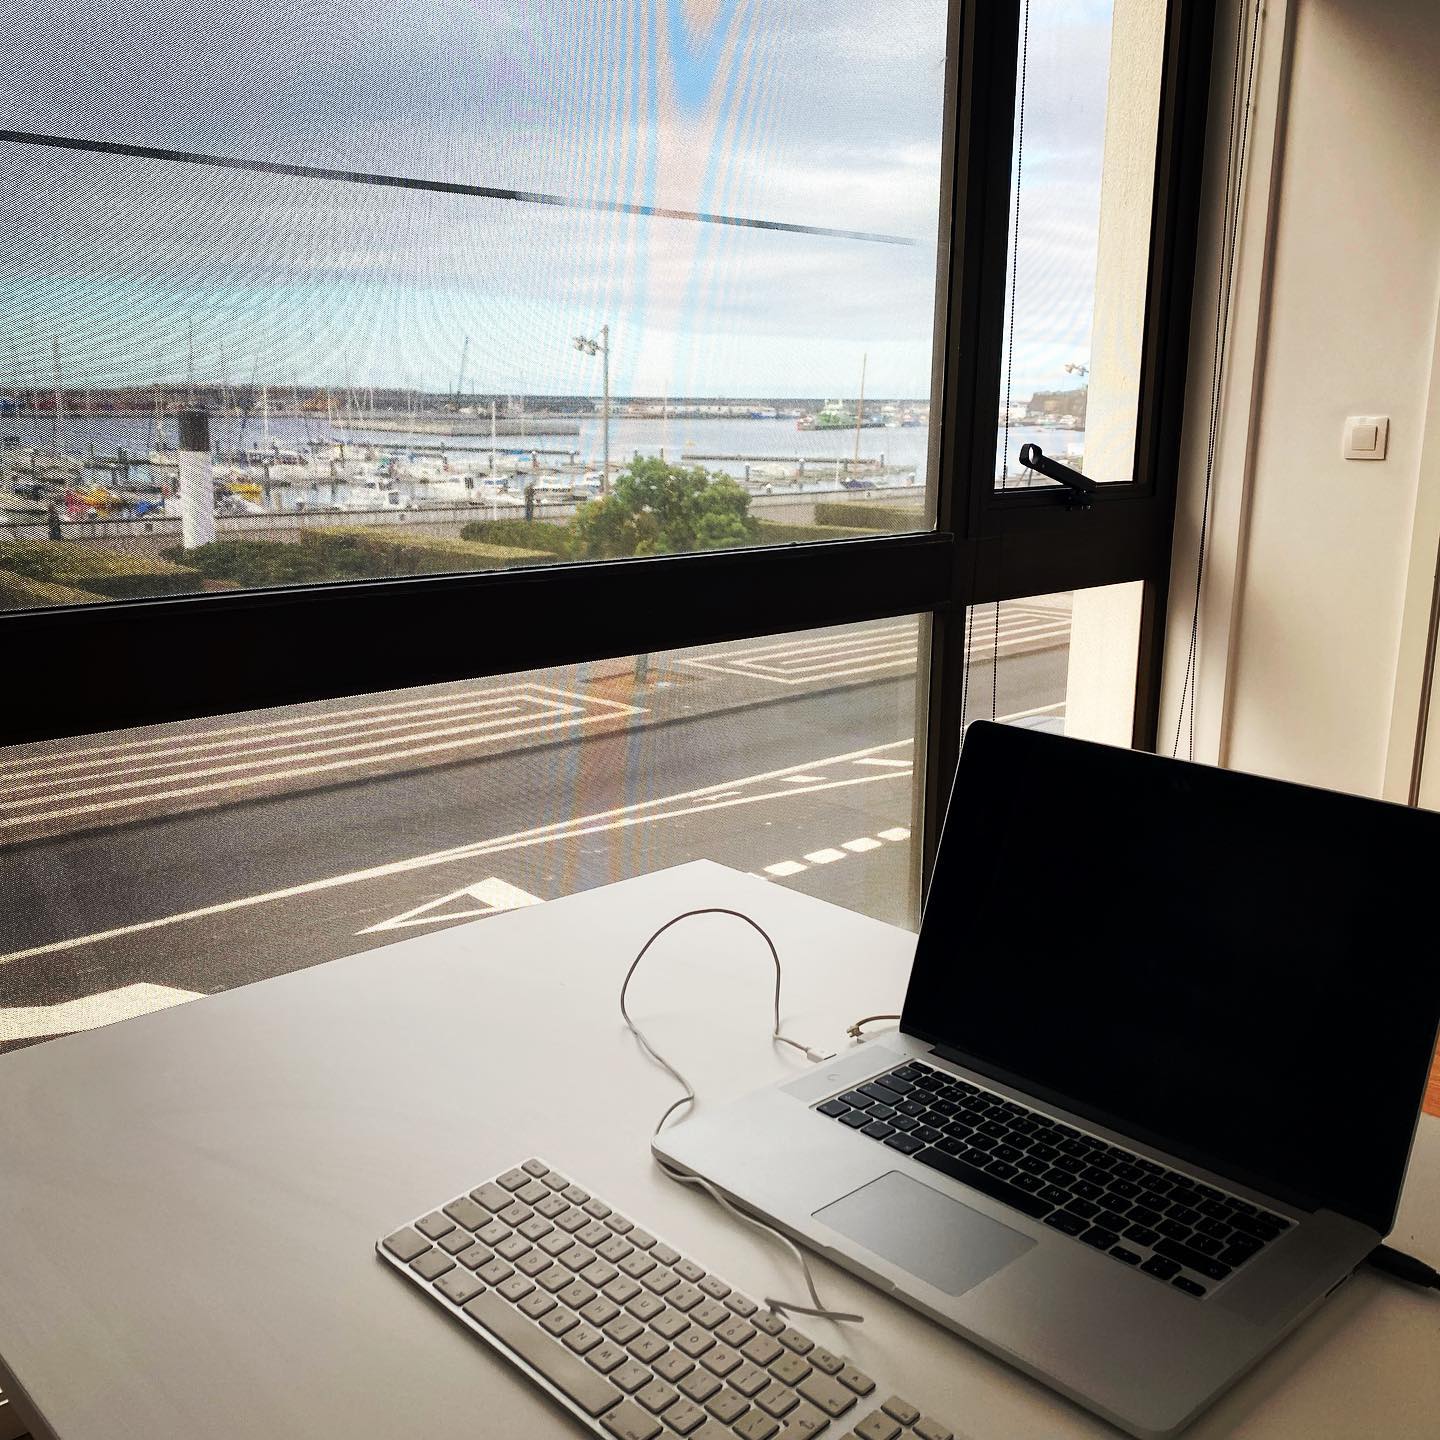 Working at our new office in Ponta Delgada 🙂